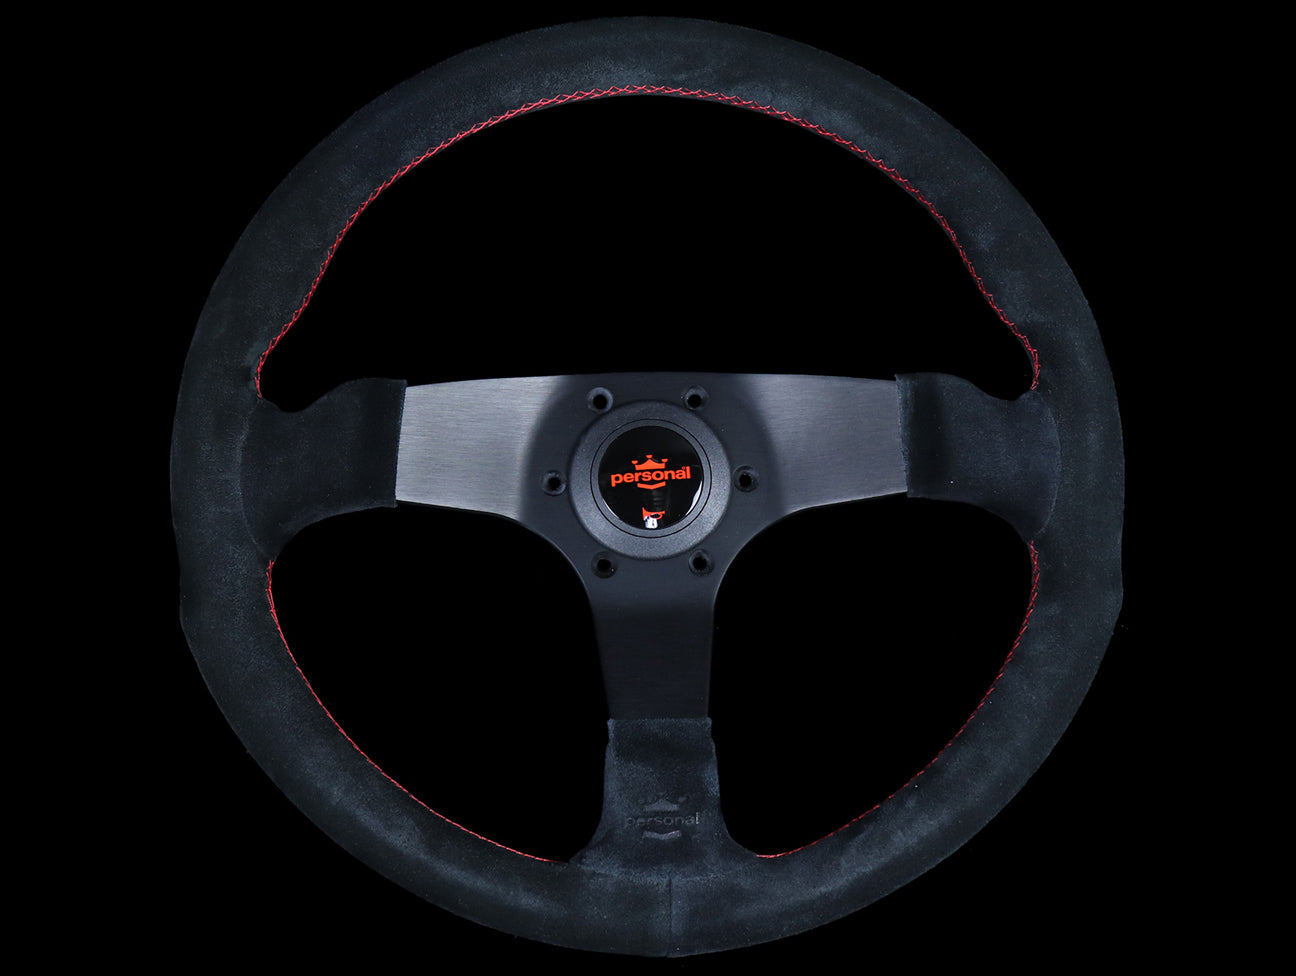 Personal Fitti Corsa 350mm Steering Wheel - Black Suede / Red Stitch